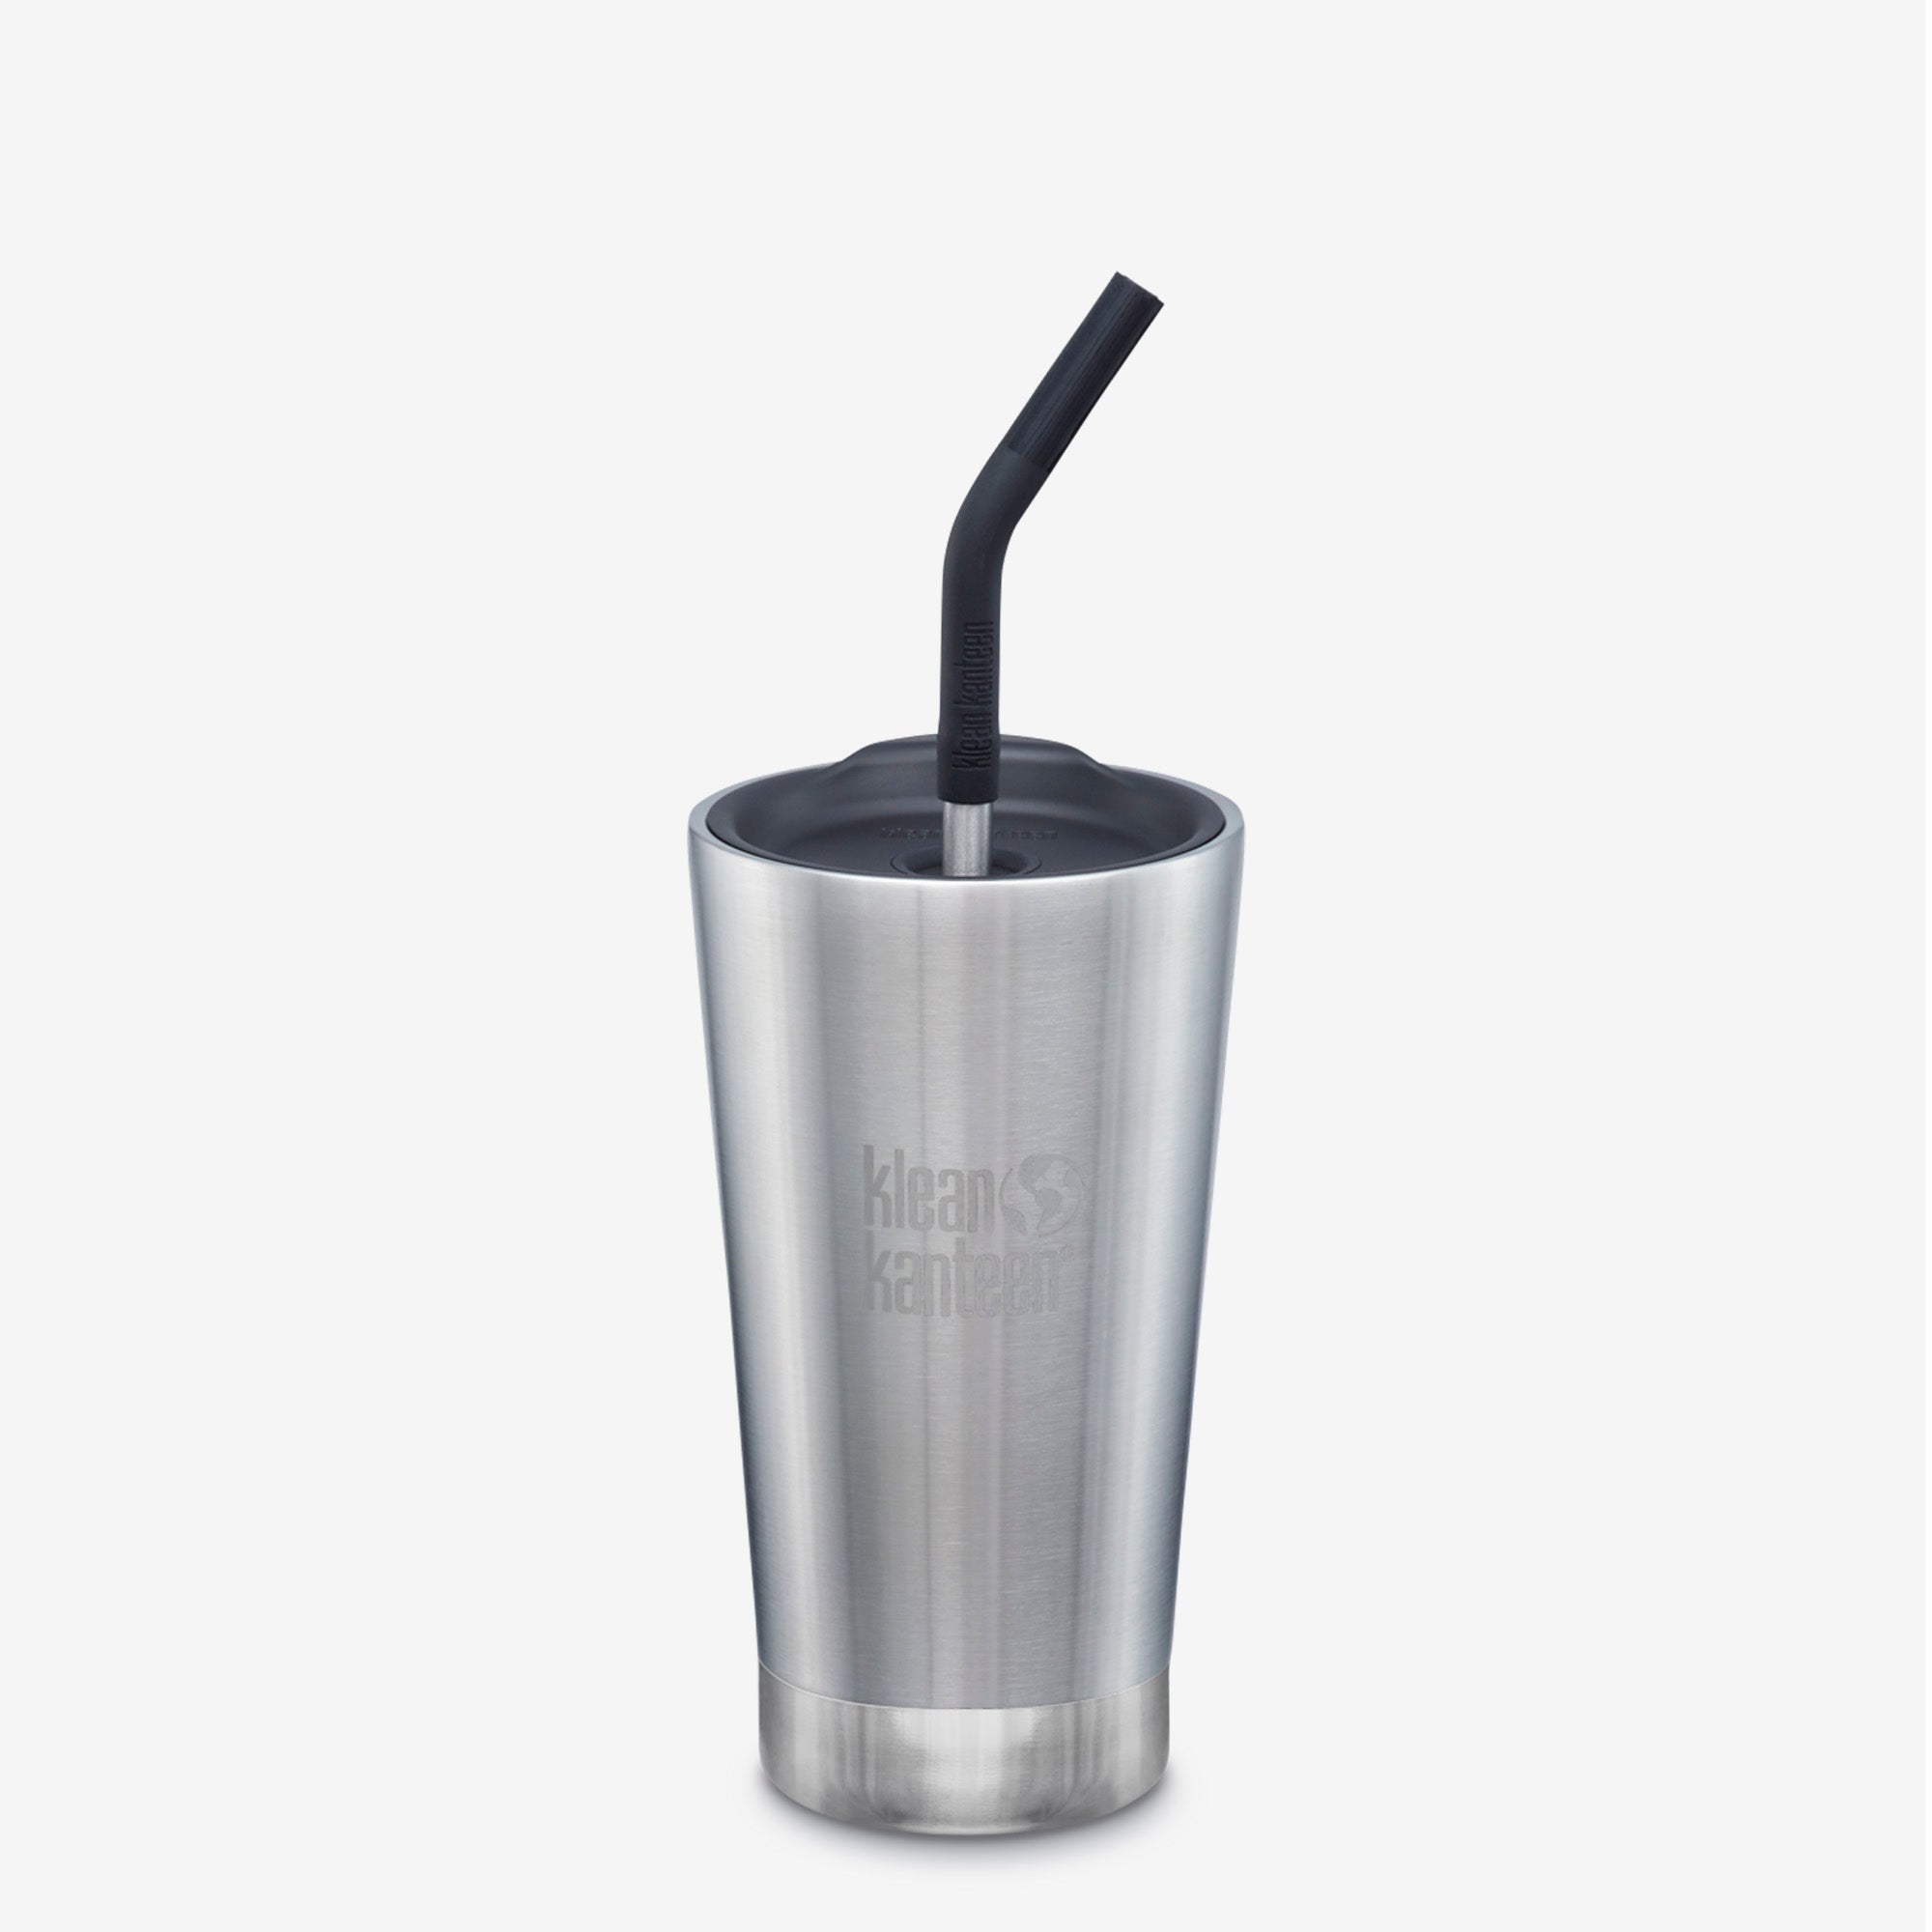 Klean Kanteen | Insulated Tumbler 16oz (473ml) with Straw Lid